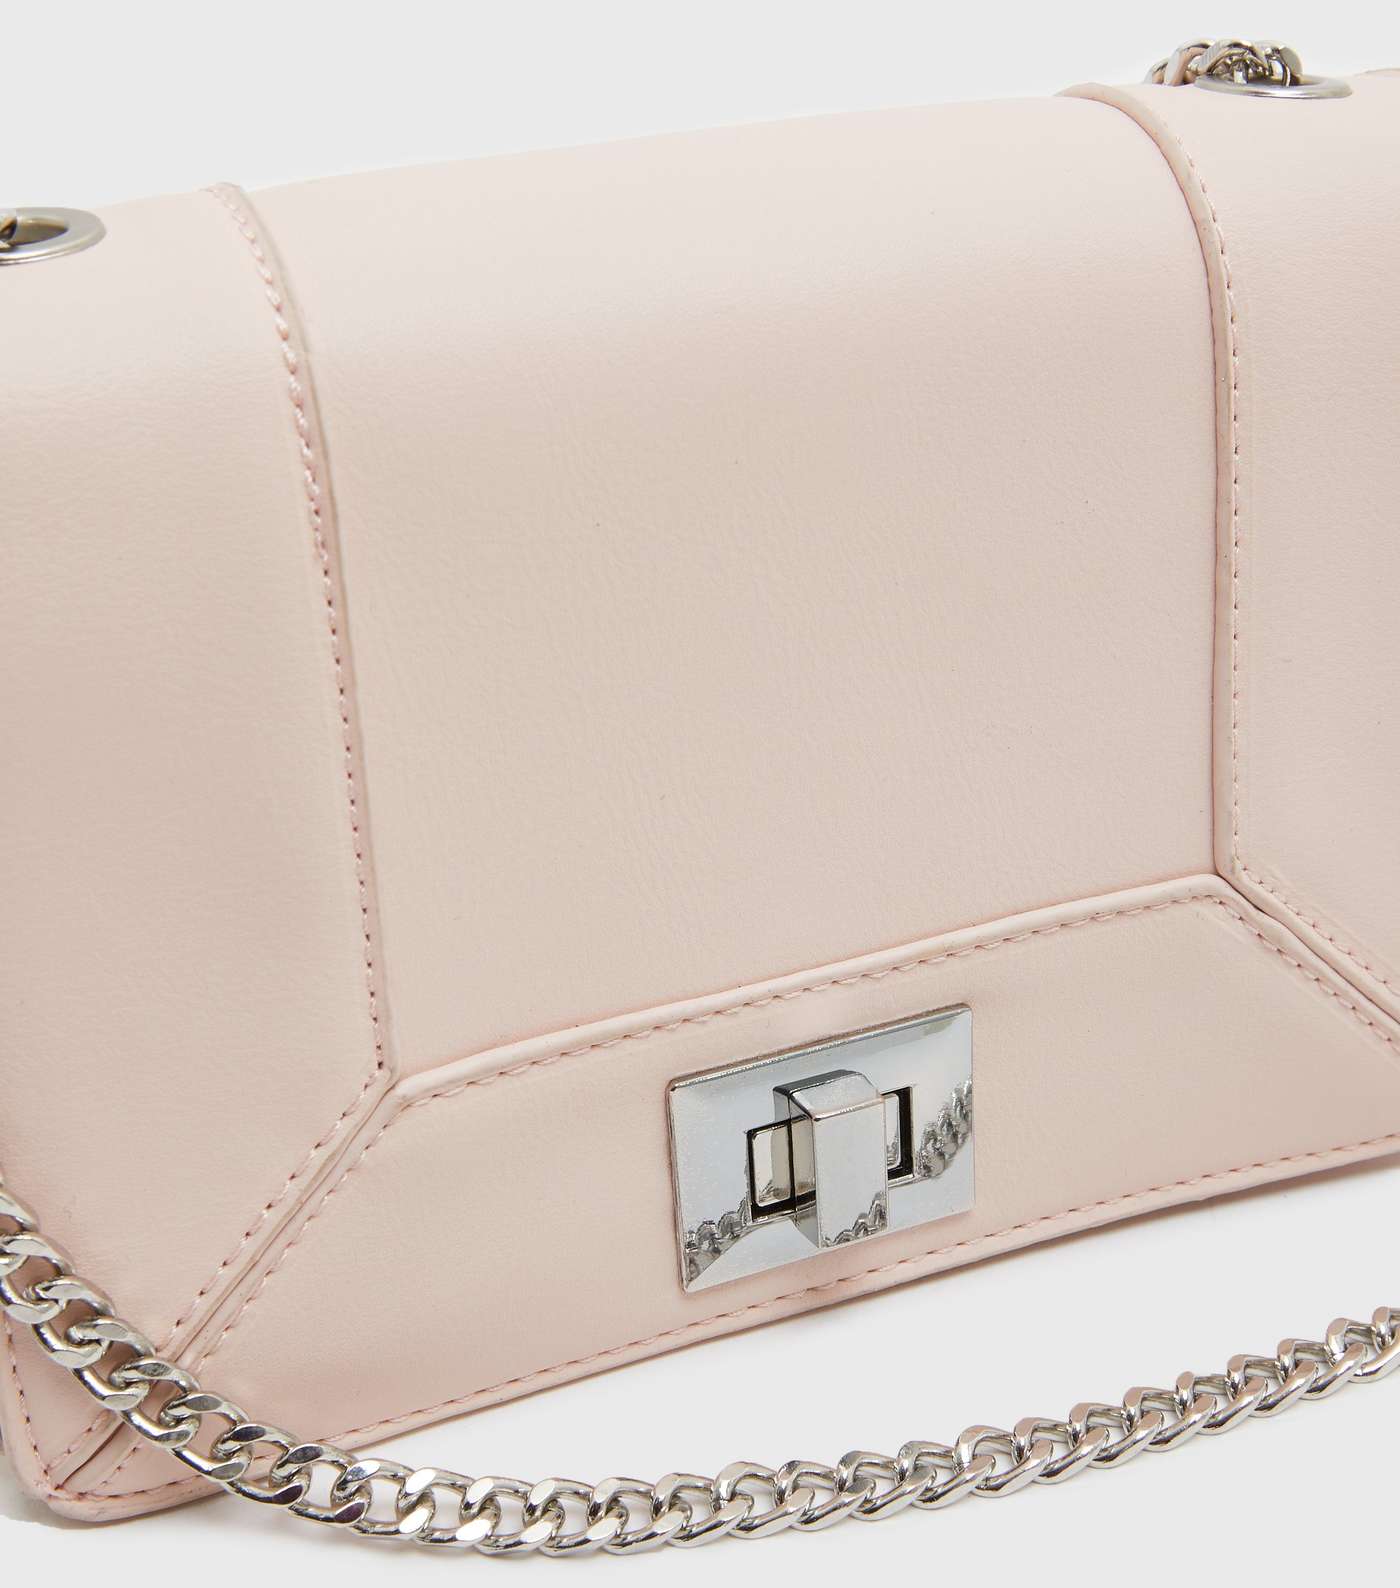 Mid Pink Leather-Look Chain Cross Body Bag Image 3